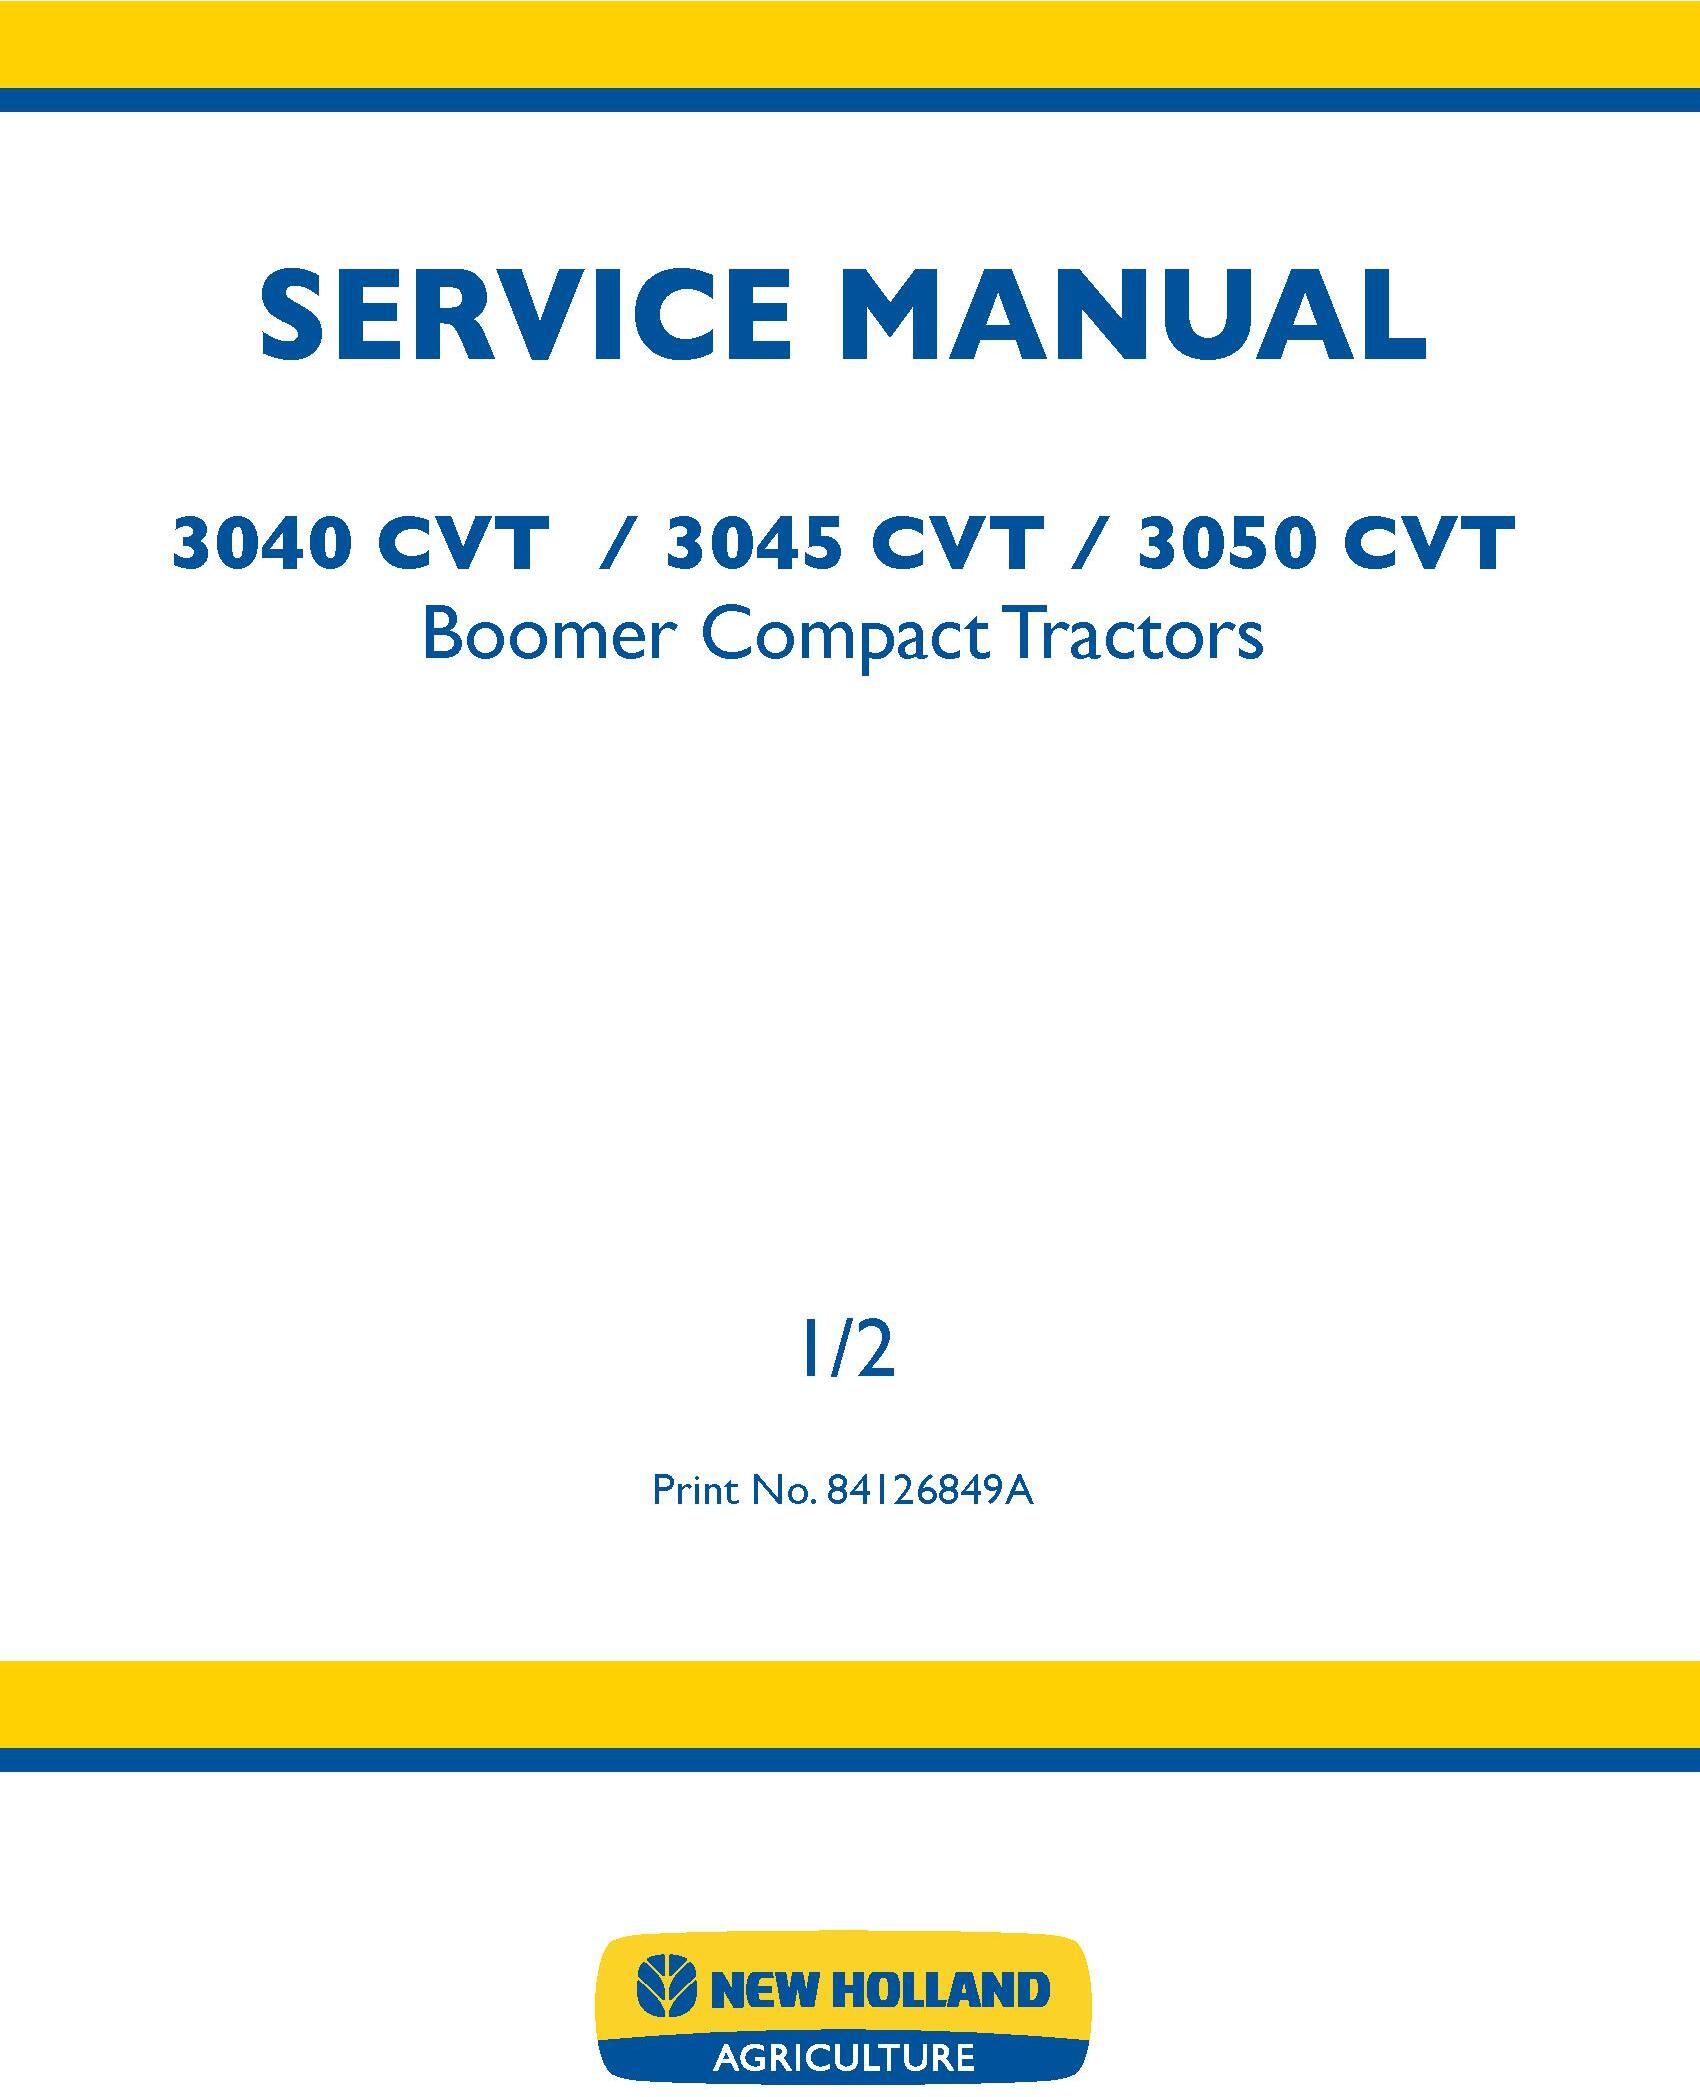 New Holland Boomer 3040, 3045, 3050 CVT Tractors Agricultural Service Manual - 19547